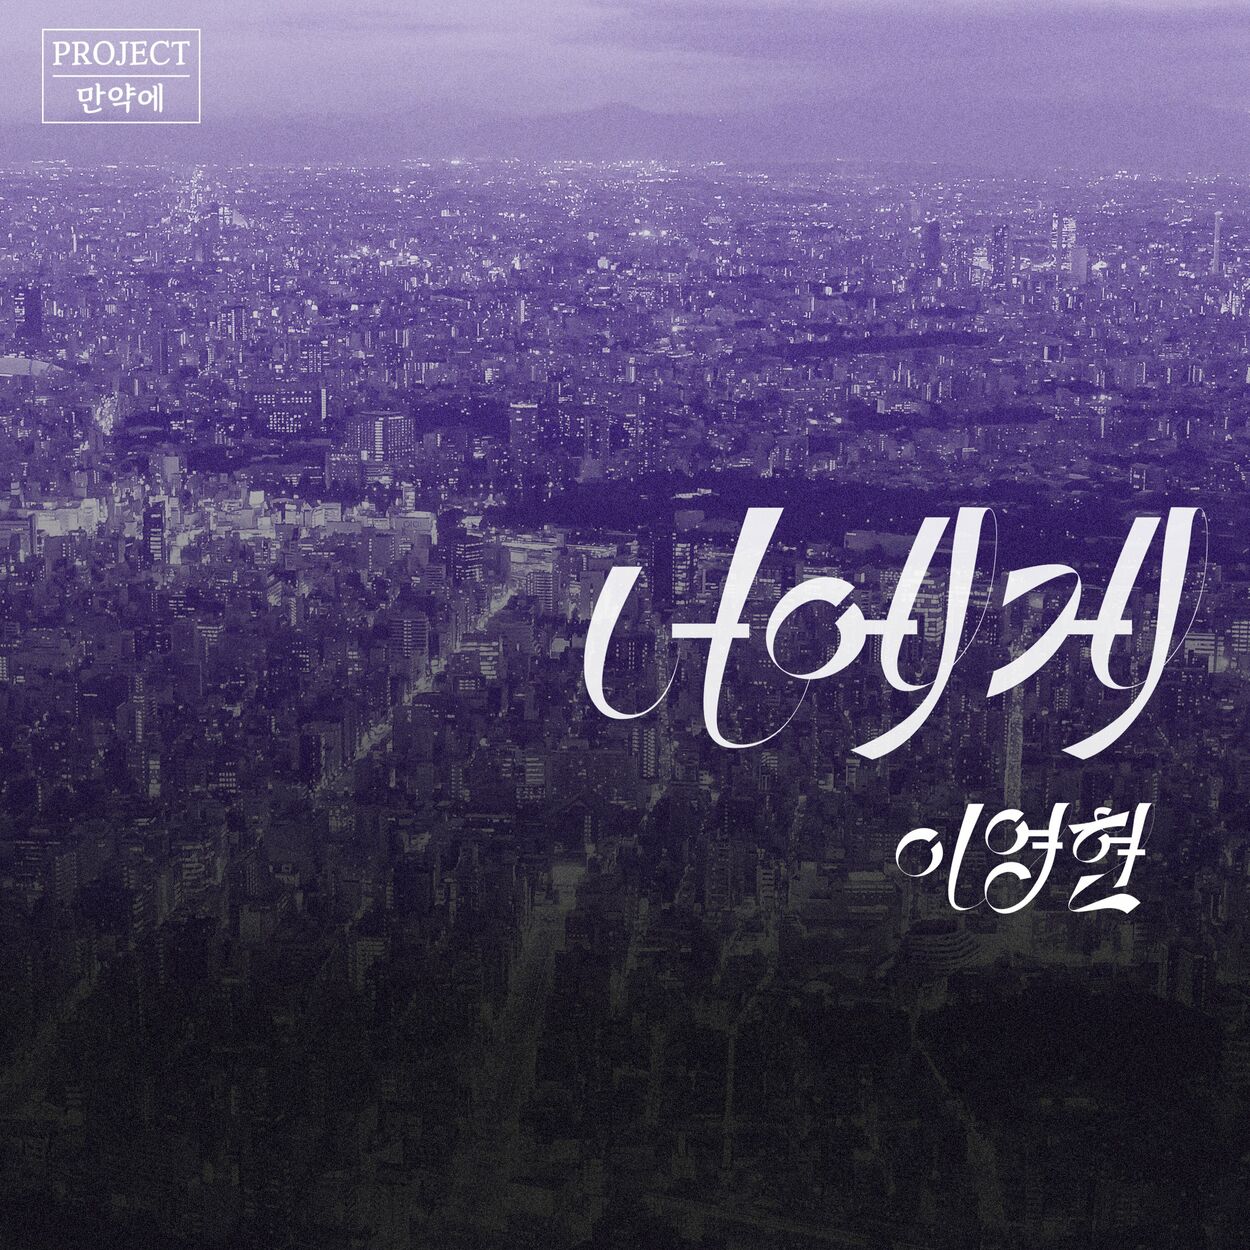 Lee Young Hyun – PROJECT if, Vol. 1 – Single